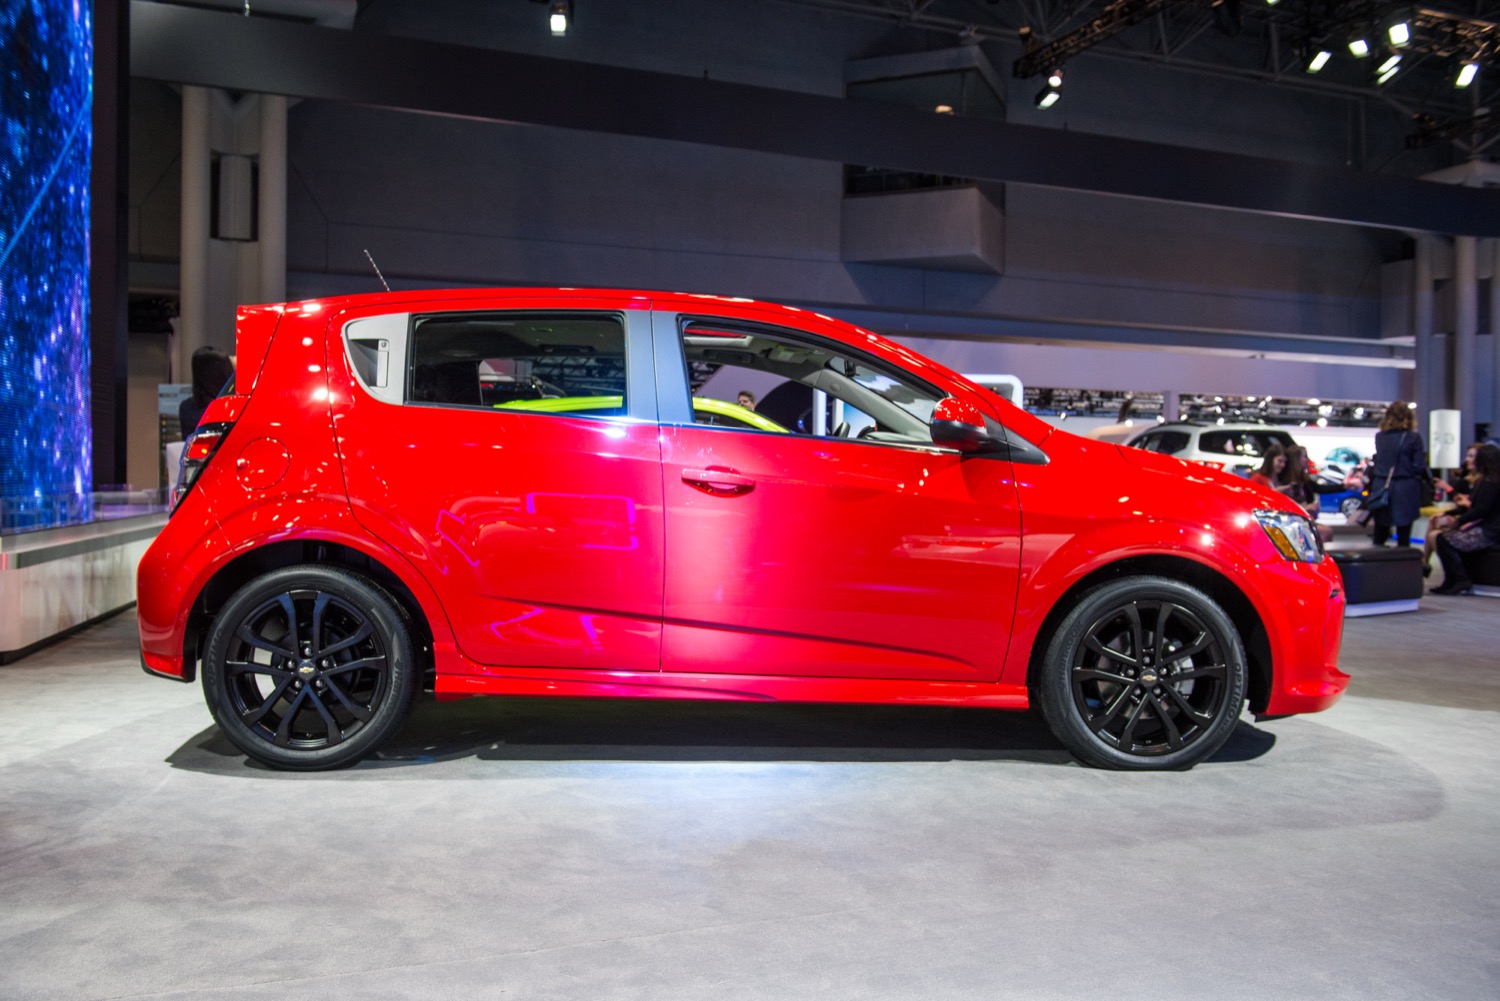 New Shock Color For 2019 Chevy Sonic Is Super Bright Gm